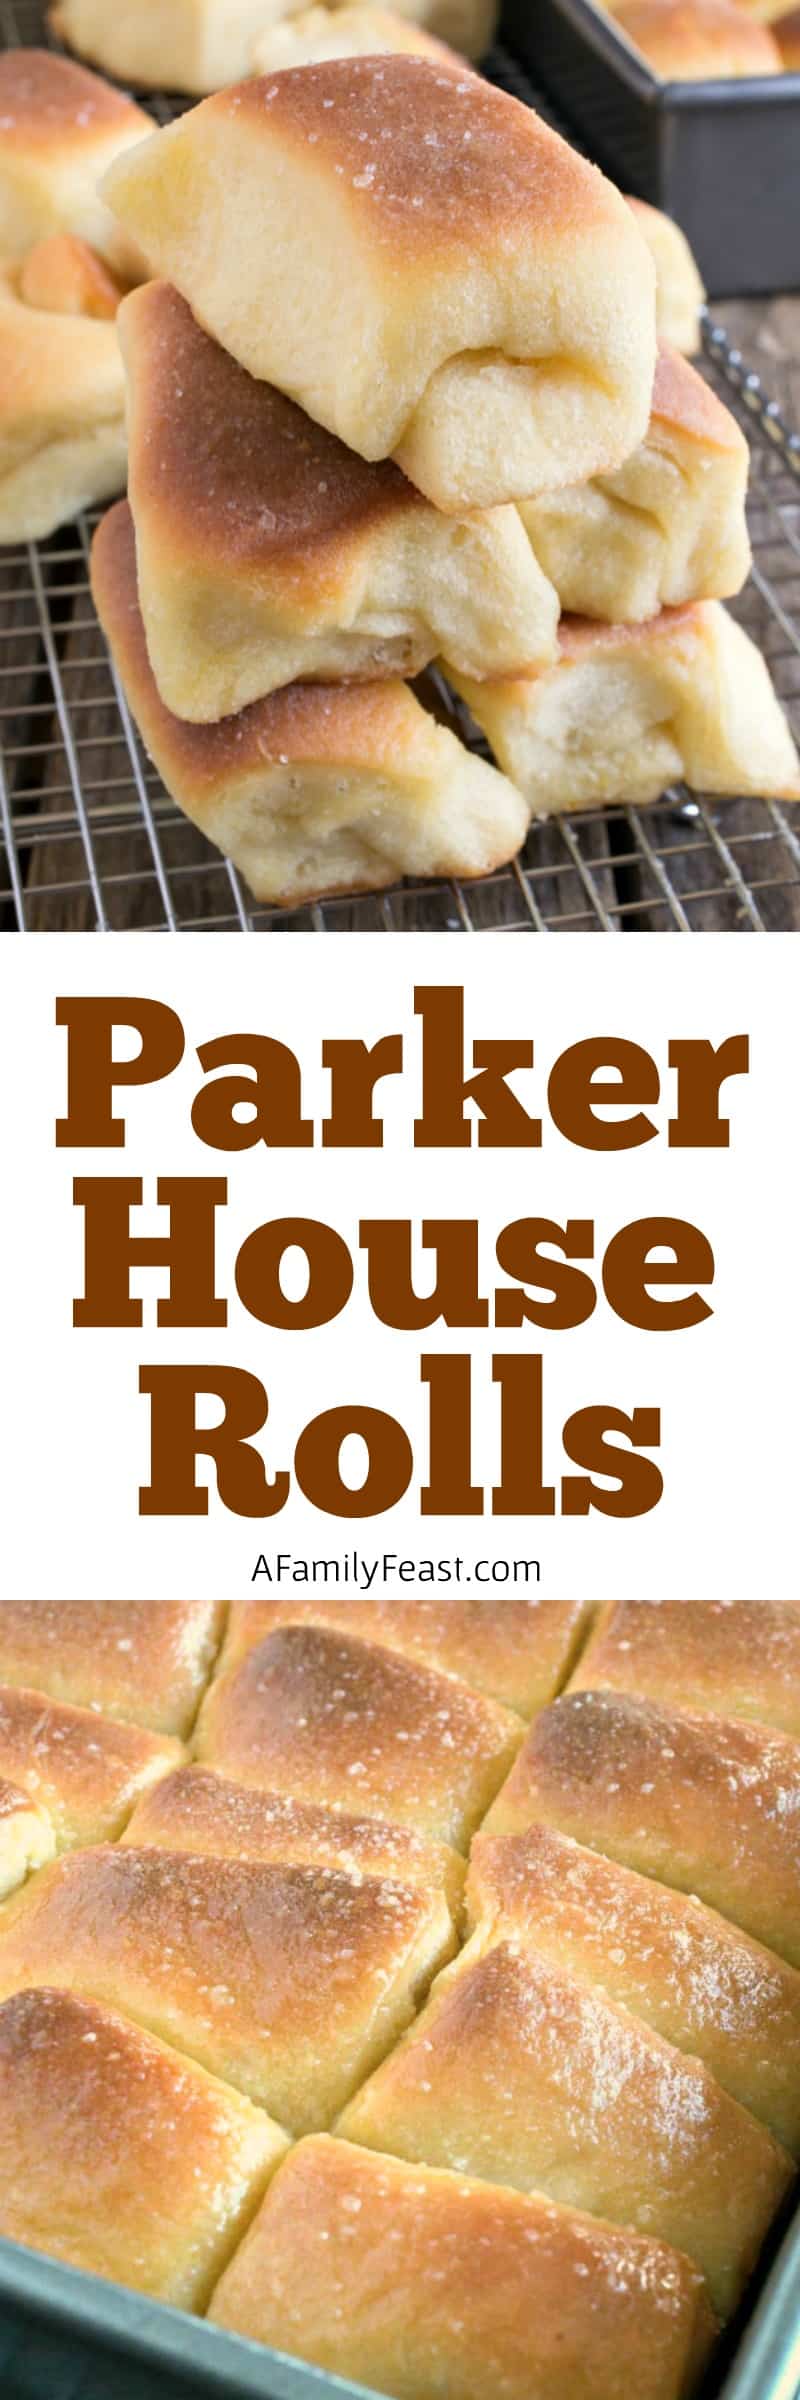 Parker House Rolls are soft, fluffy dinner rolls with a touch of sweetness and a twice-buttered top that has been sprinkled generously with sea salt. 